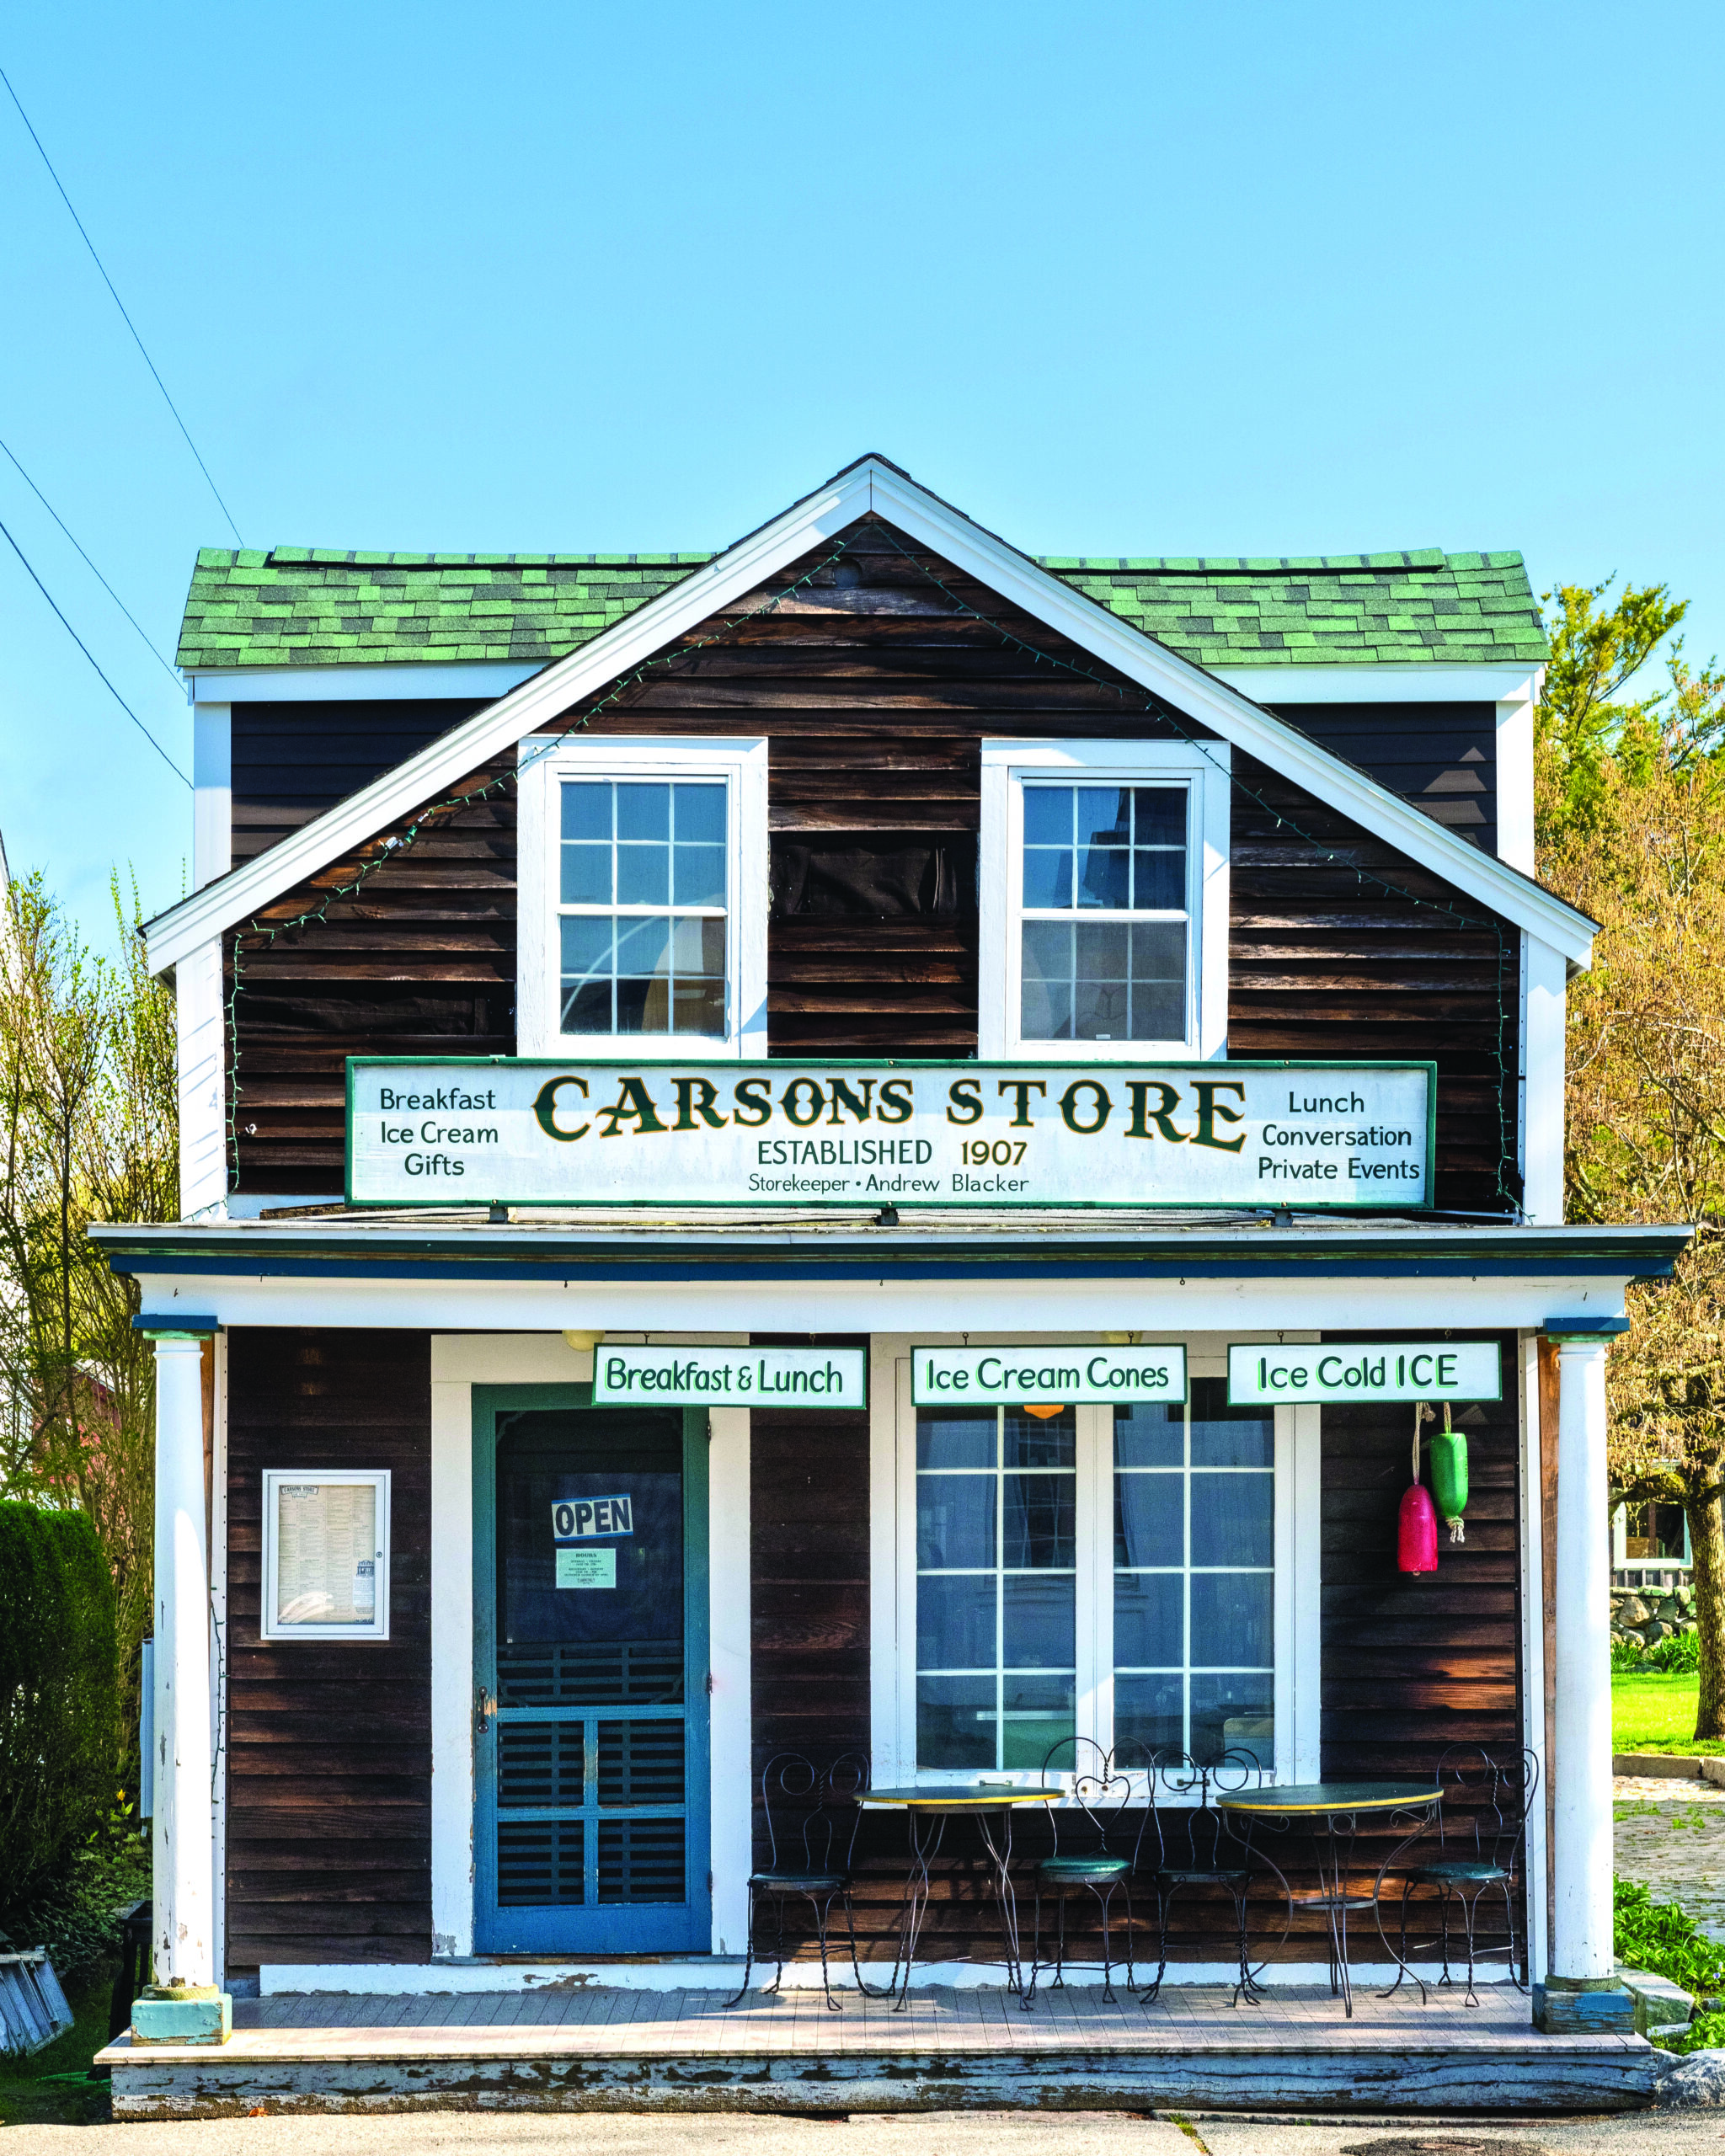 dark wooden sided building with white trim and details. Sign above reading "Carson's store", sells food and ice cream. Small metal tables and chairs on the porch.  